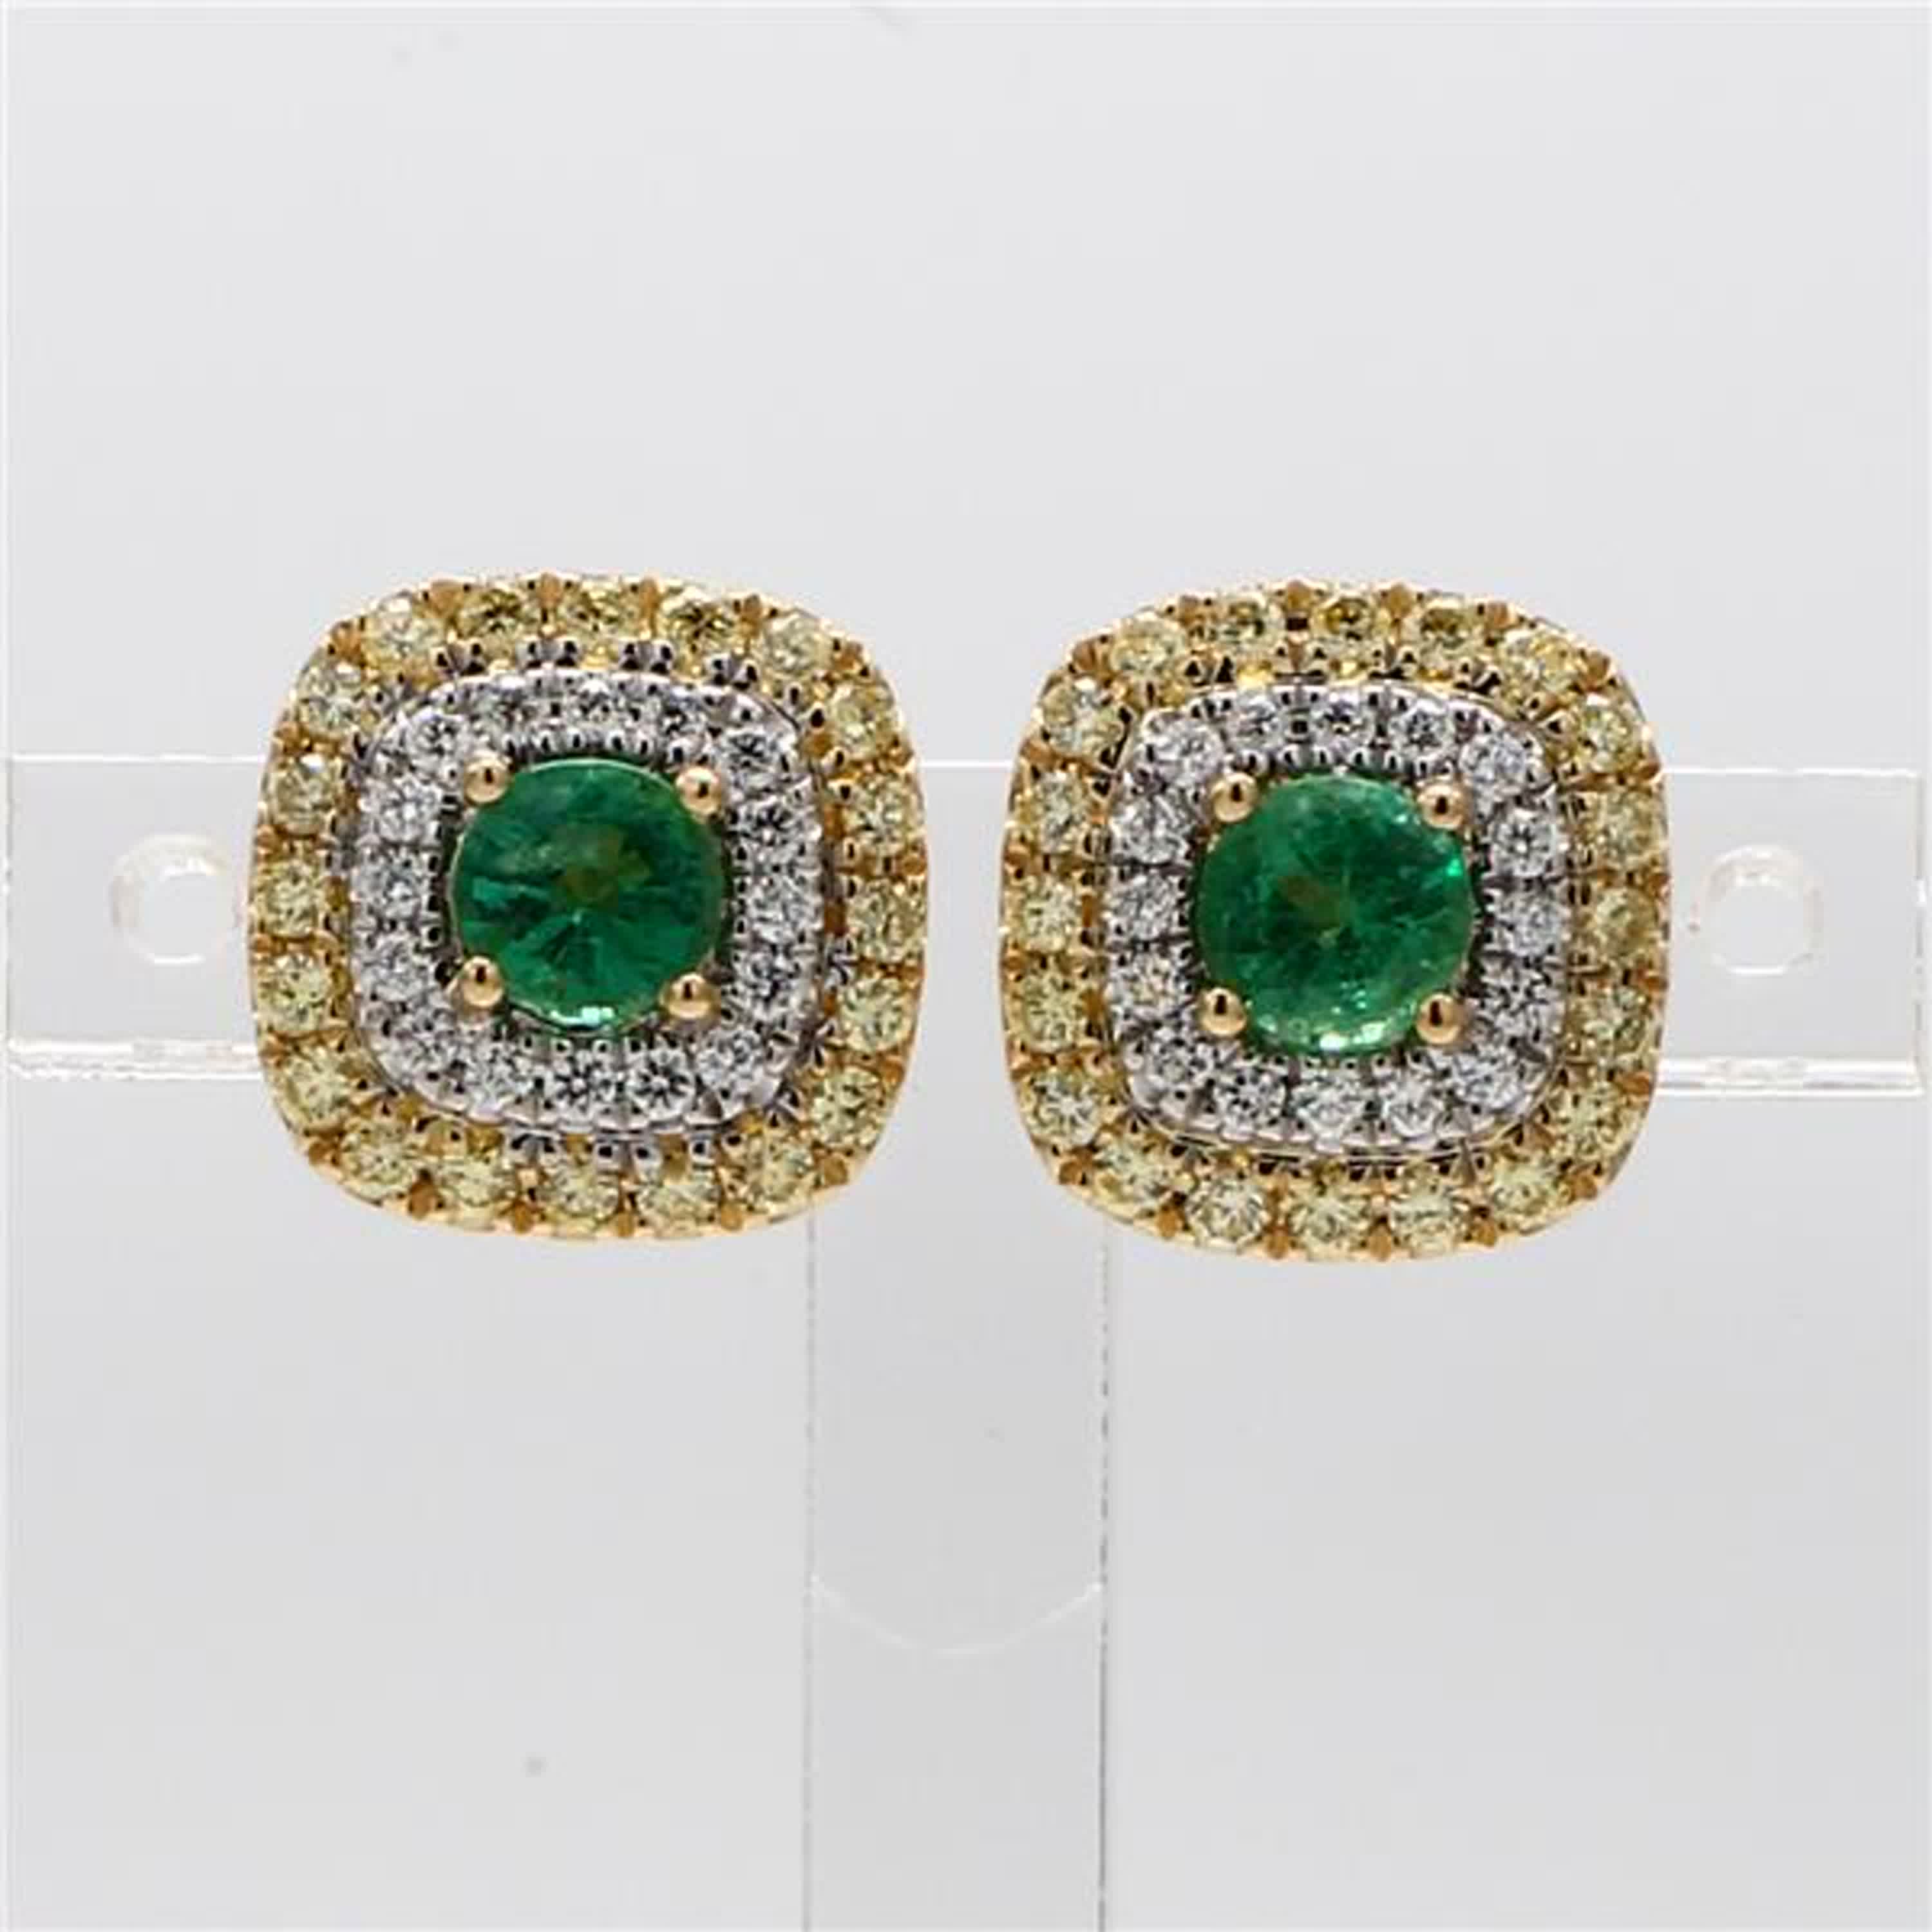 Natural Round Emerald and Diamond 1.08 Carat TW Gold Stud Earrings